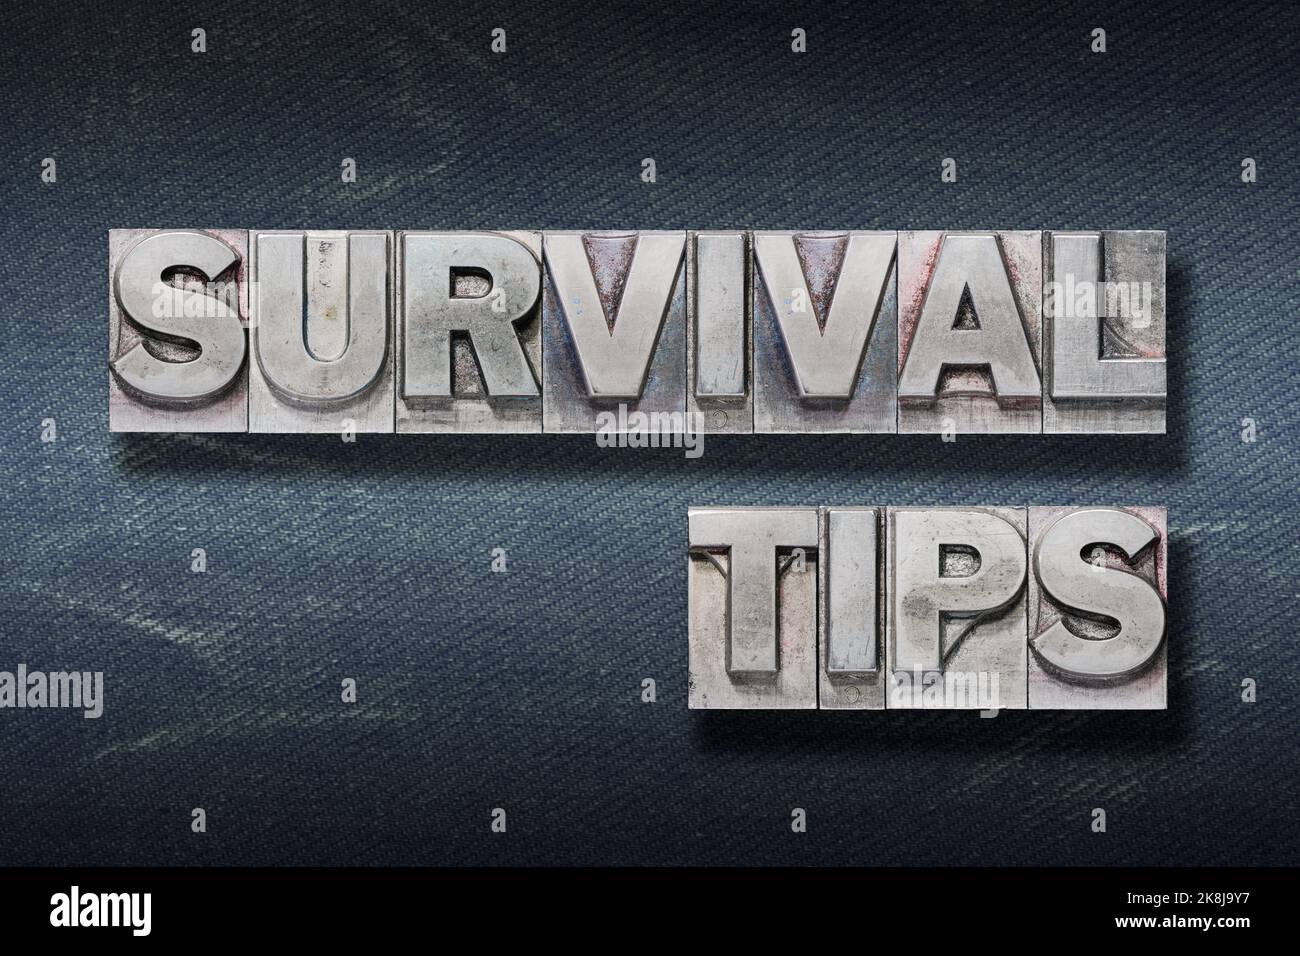 survival tips phrase made from metallic letterpress on dark jeans background Stock Photo